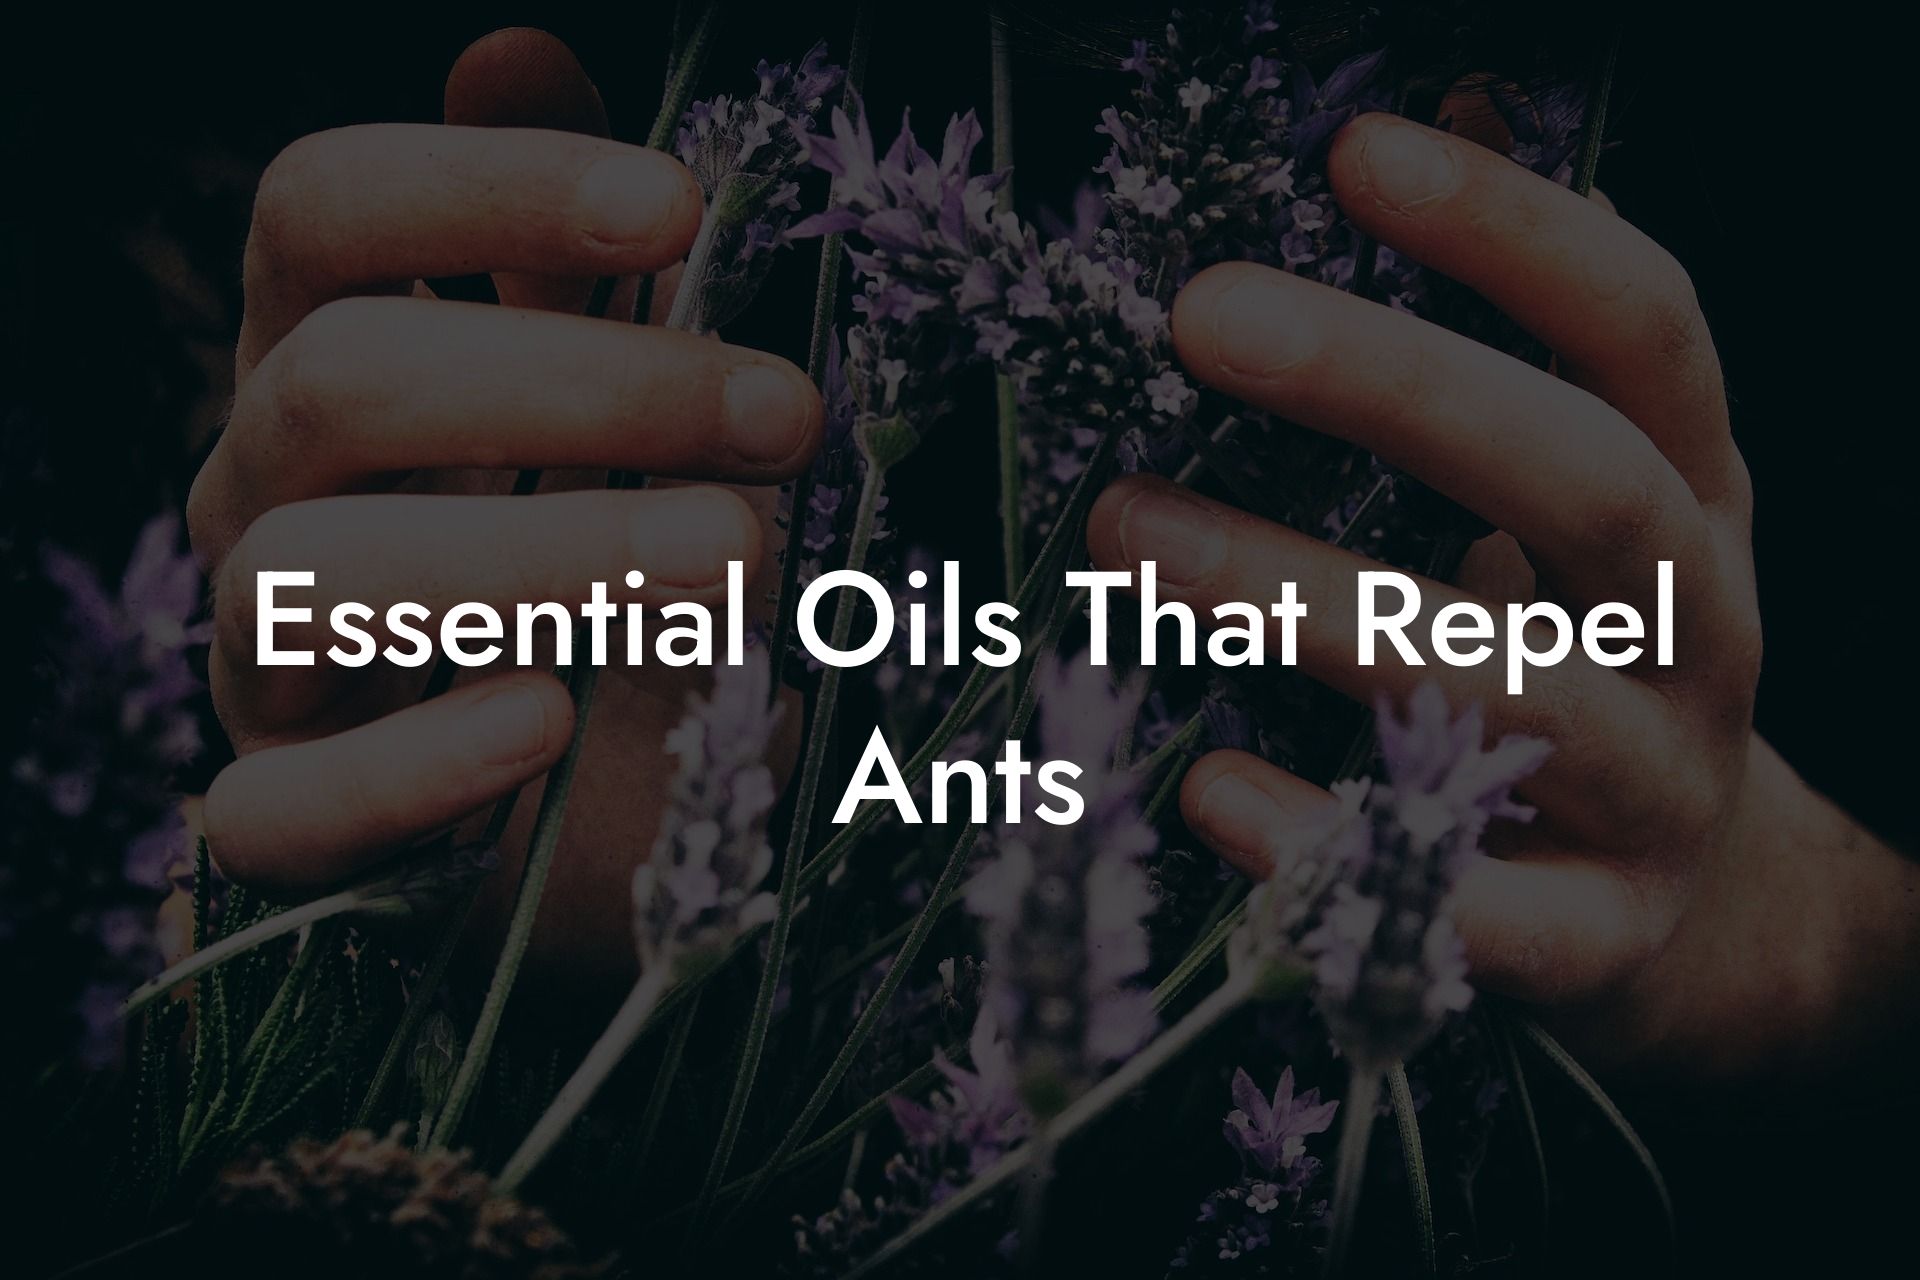 Essential Oils That Repel Ants